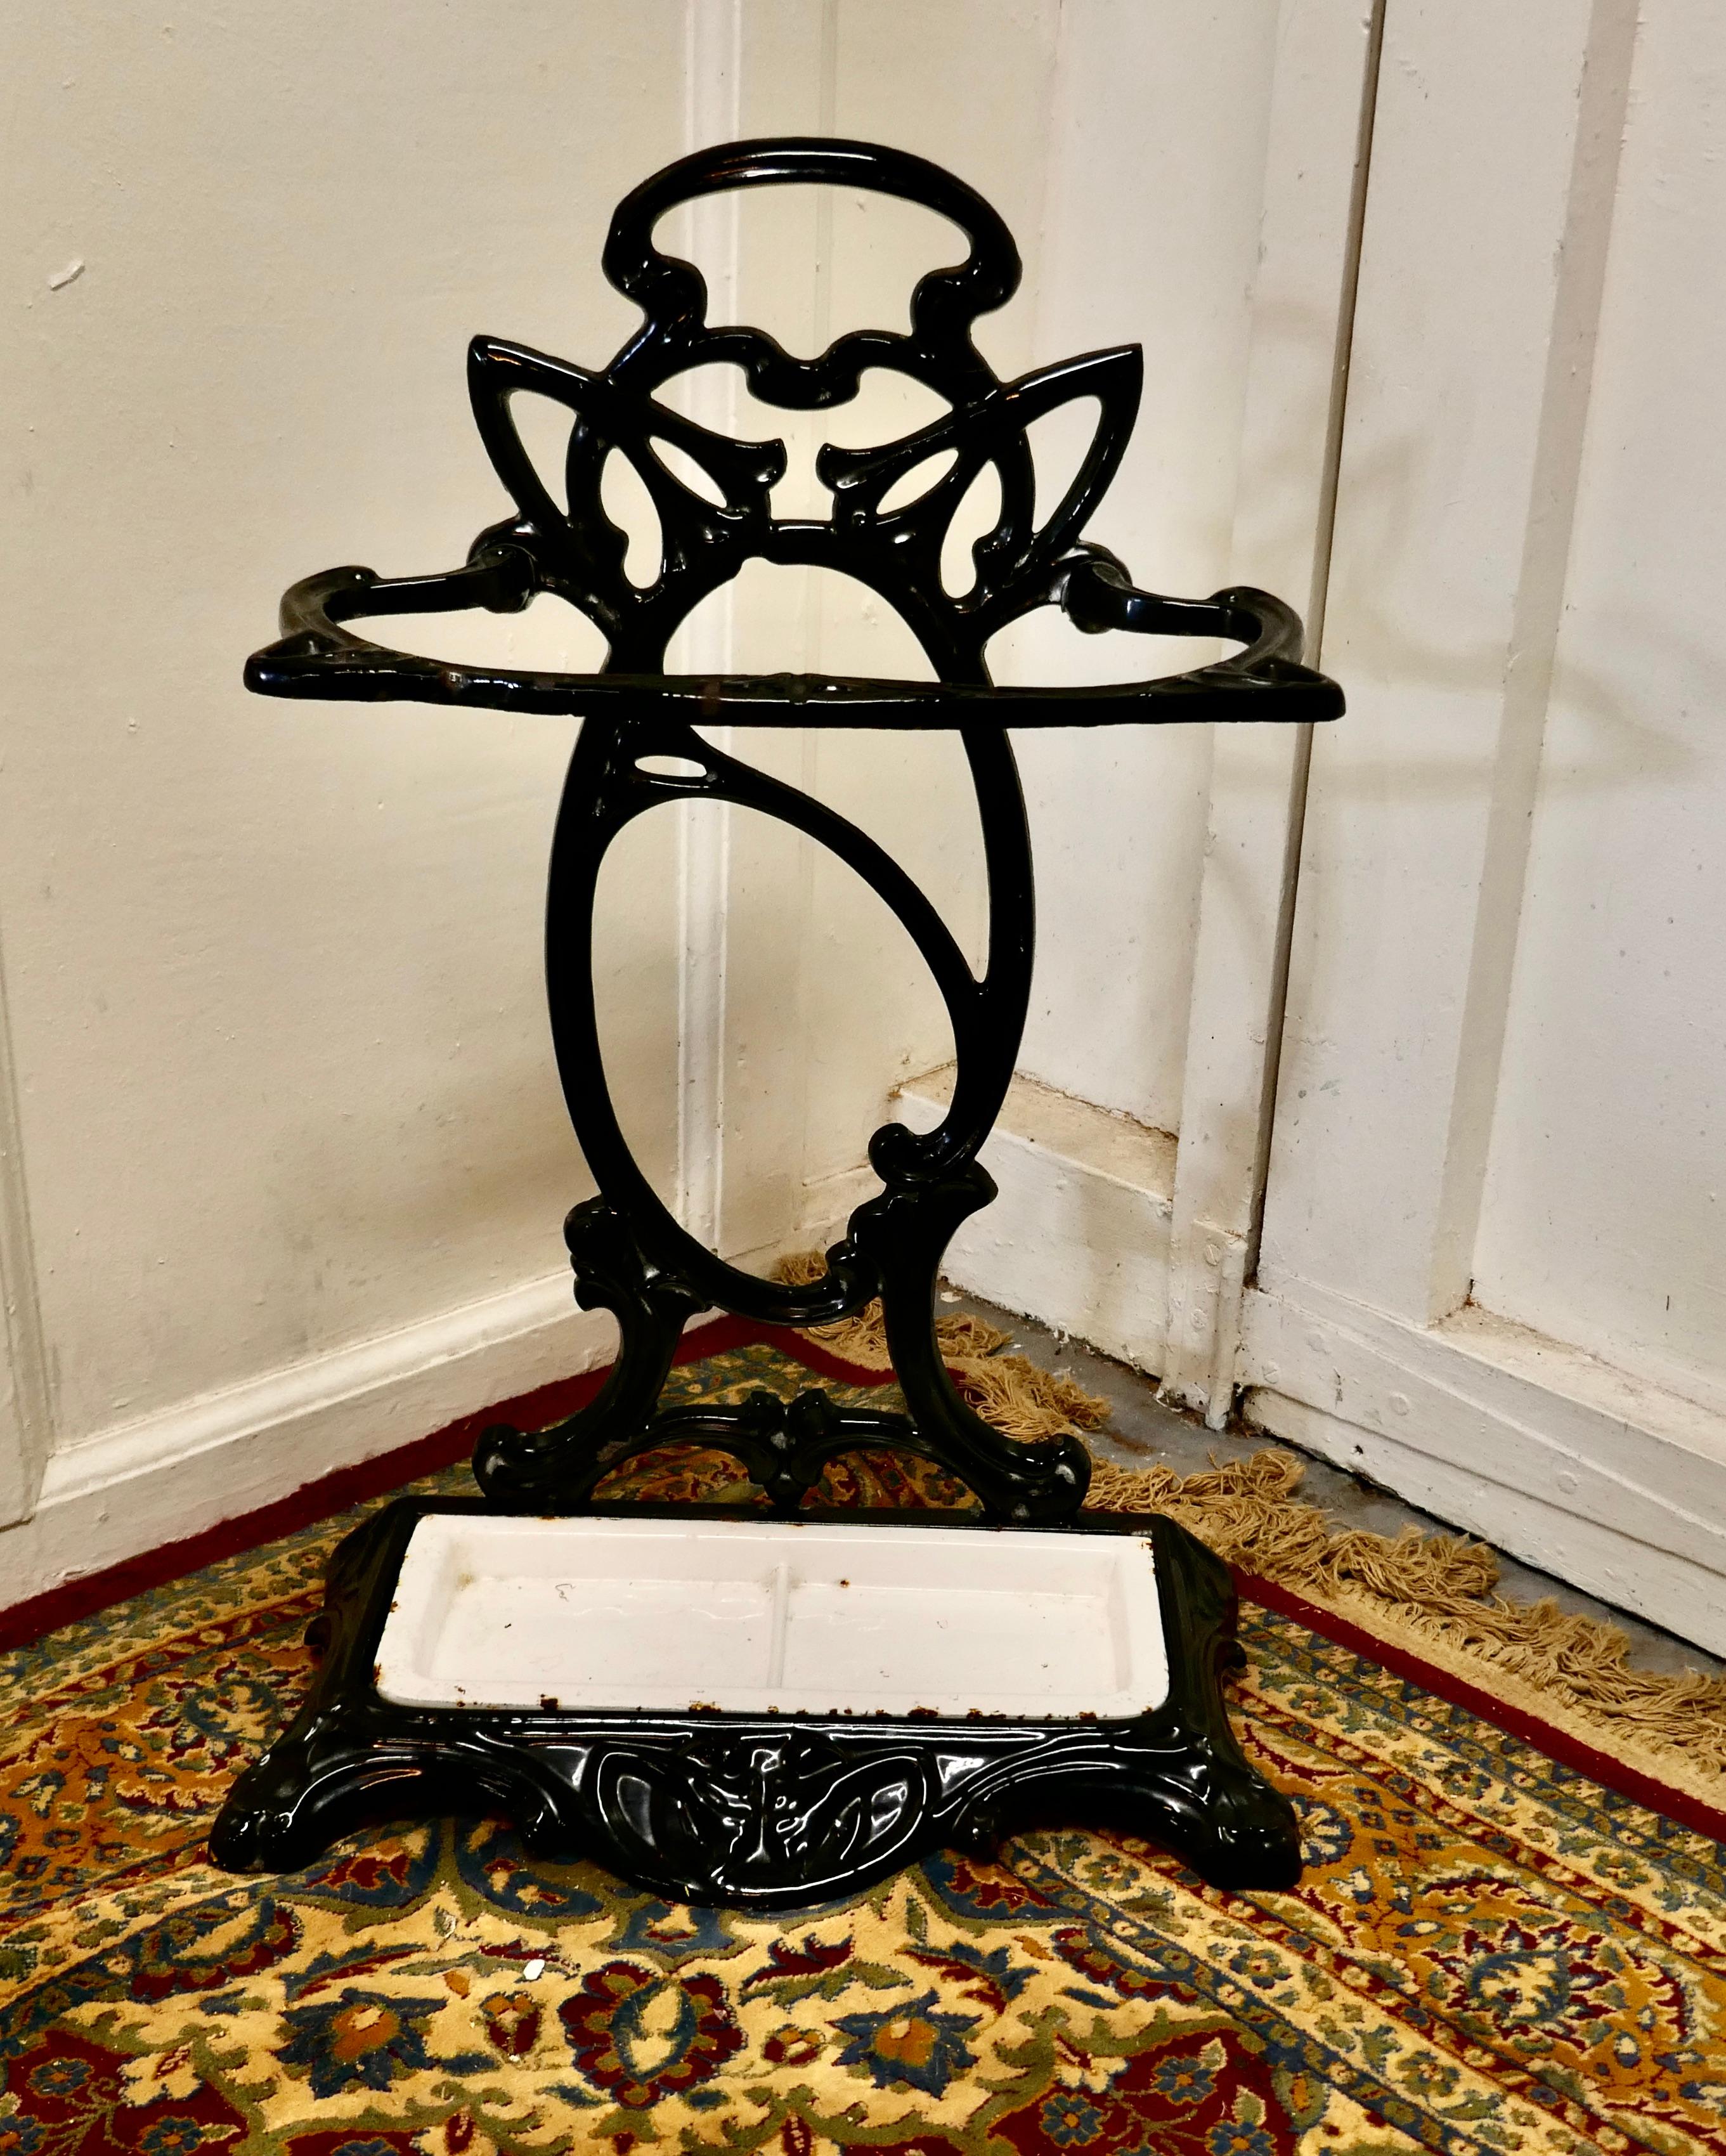 Art Nouveau cast iron umbrella and stick stand

A very attractive Art Nouveau cast iron hall stand with a removable enamel drip tray
This impressive little cast iron hall stand is in great condition it has a painted finish which is very slightly